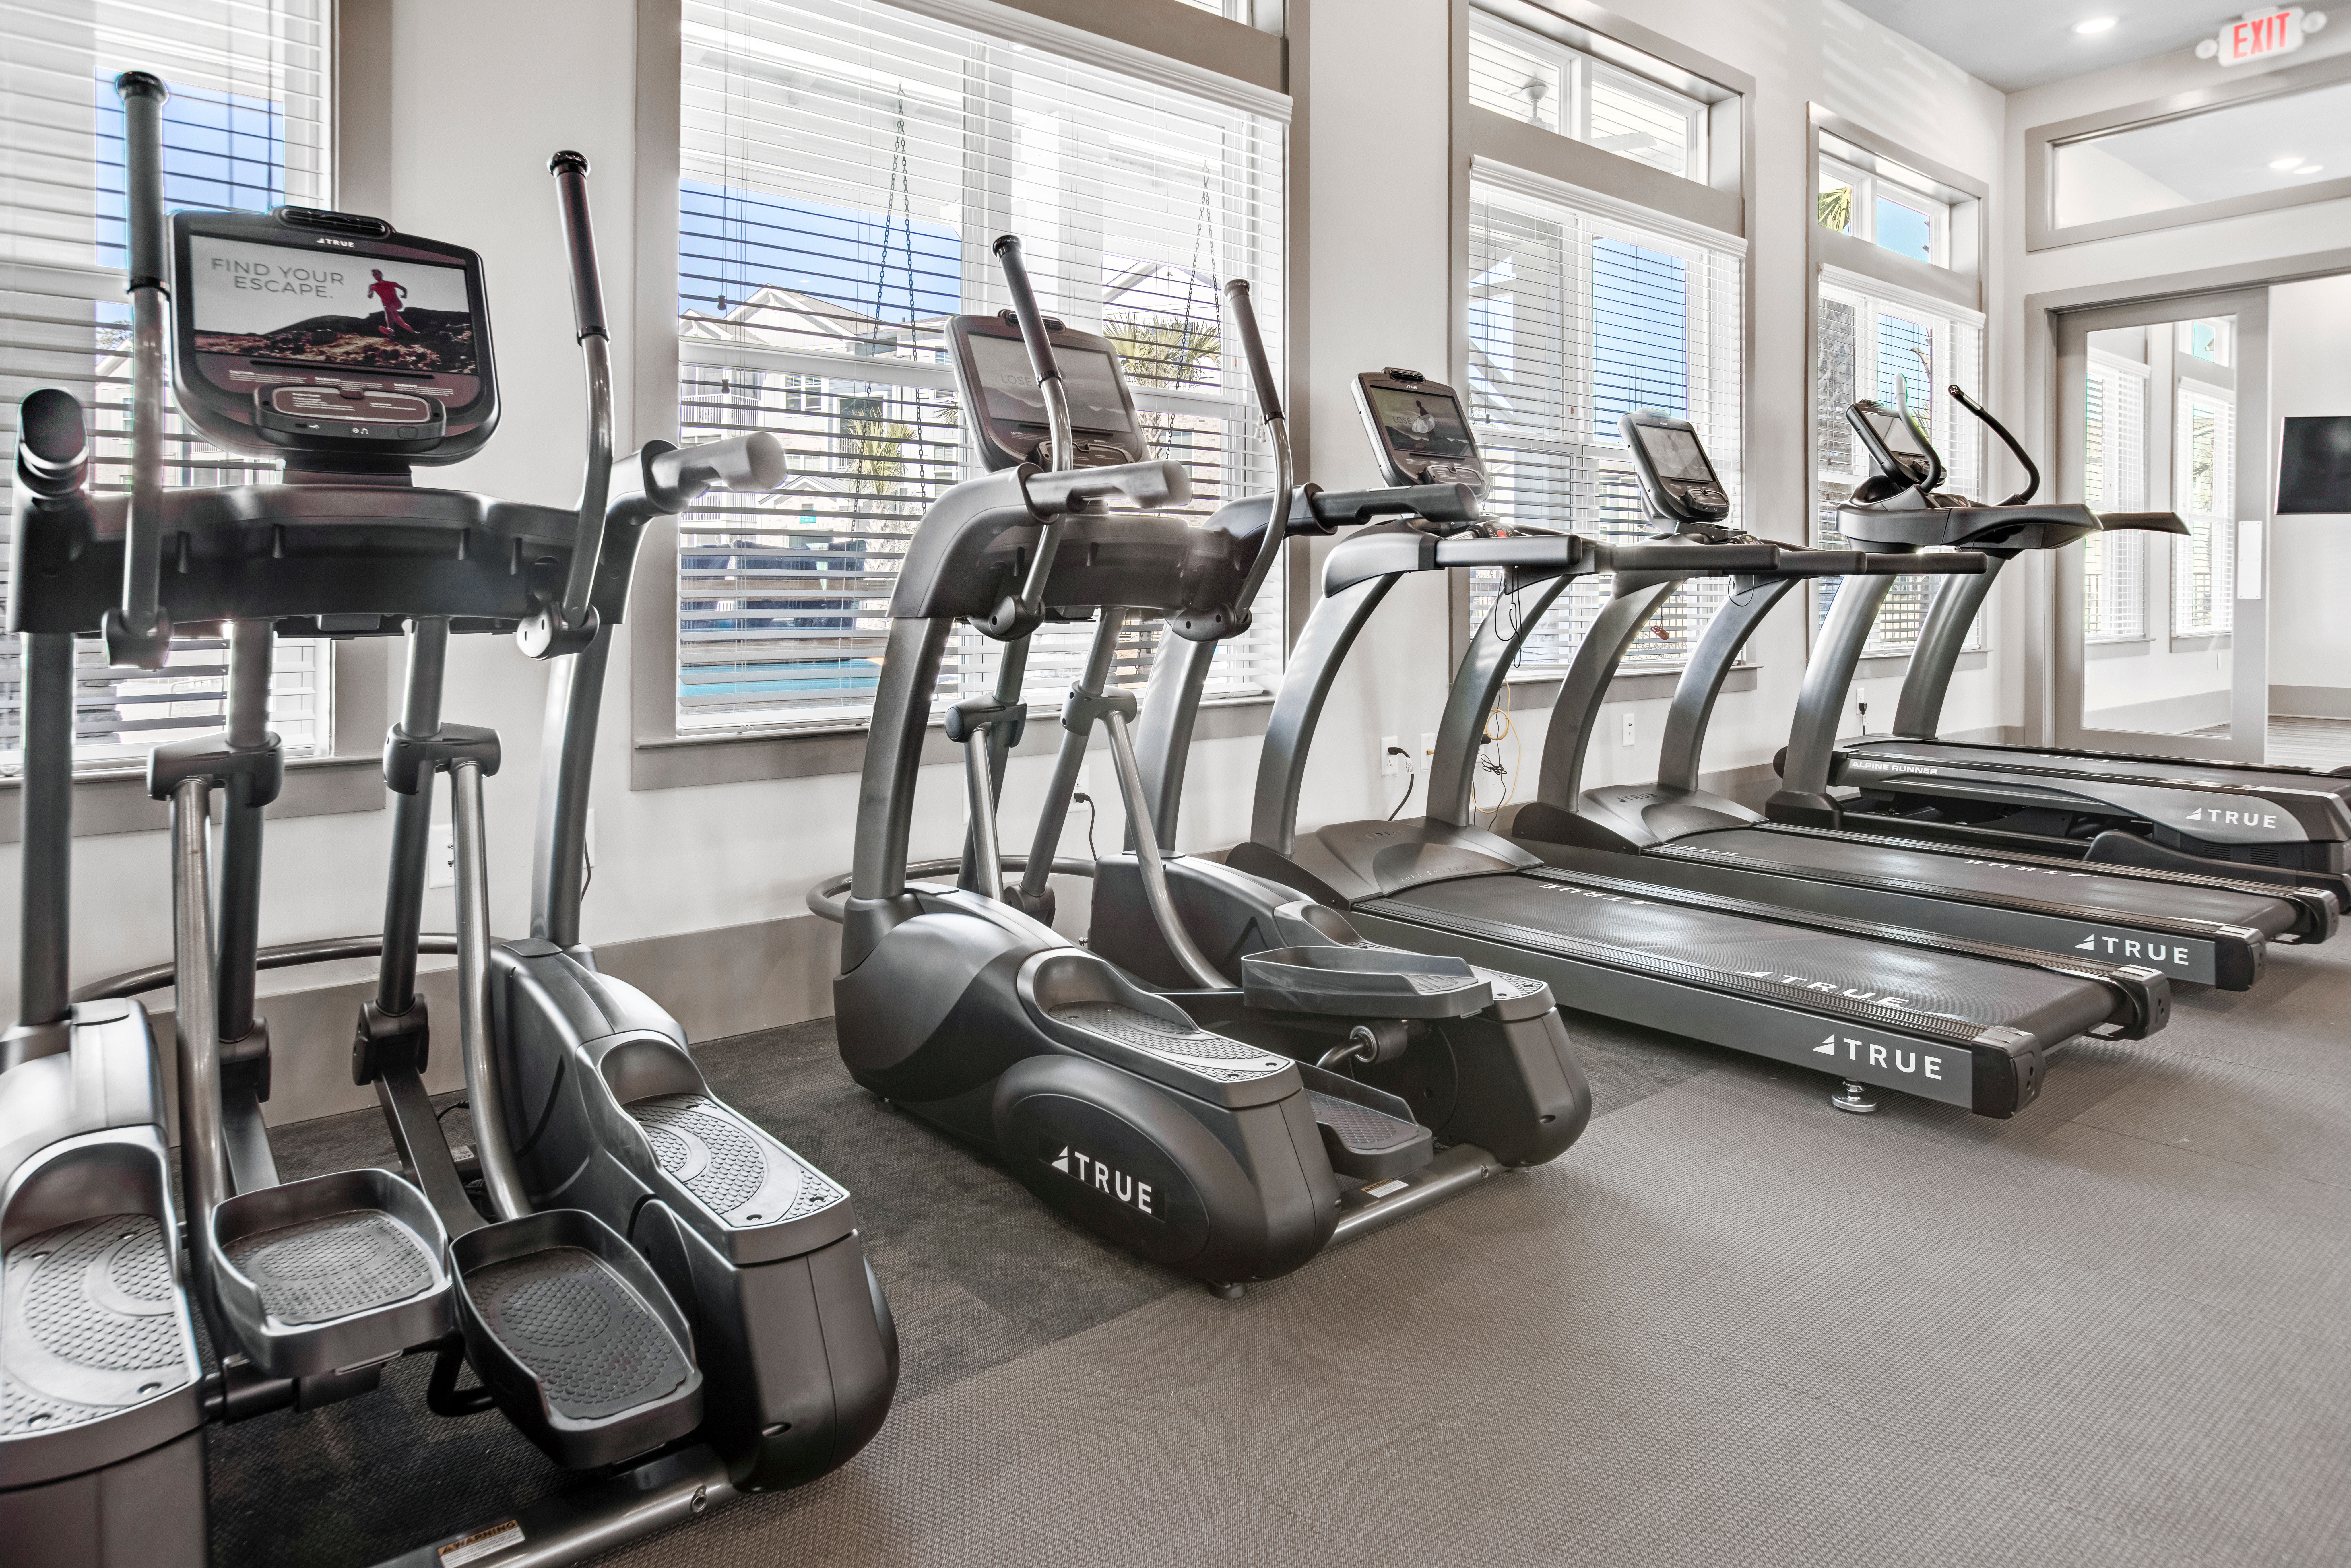 Full sized state of the art fitness center at South City Apartments in Summerville, South Carolina